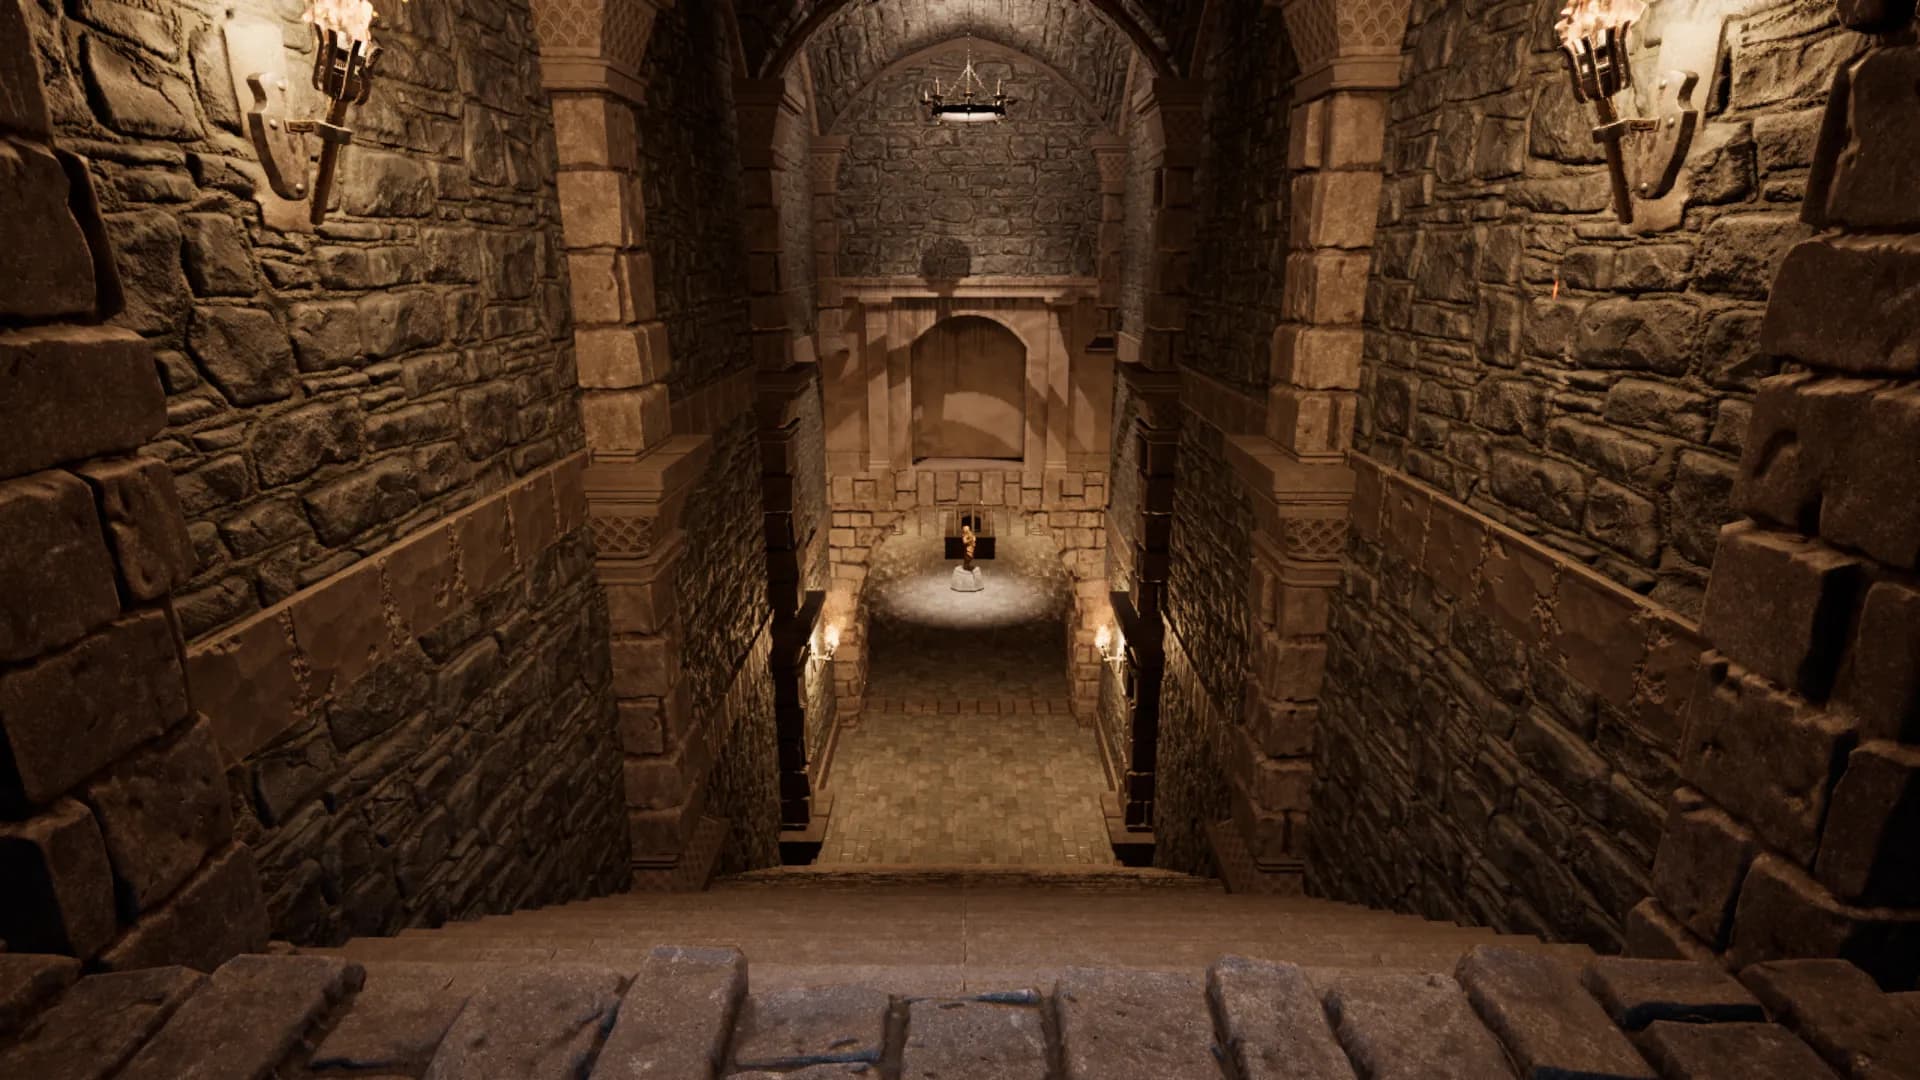 Screenshot 7: Revealed stairway to the treasure after a hidden wall comes down